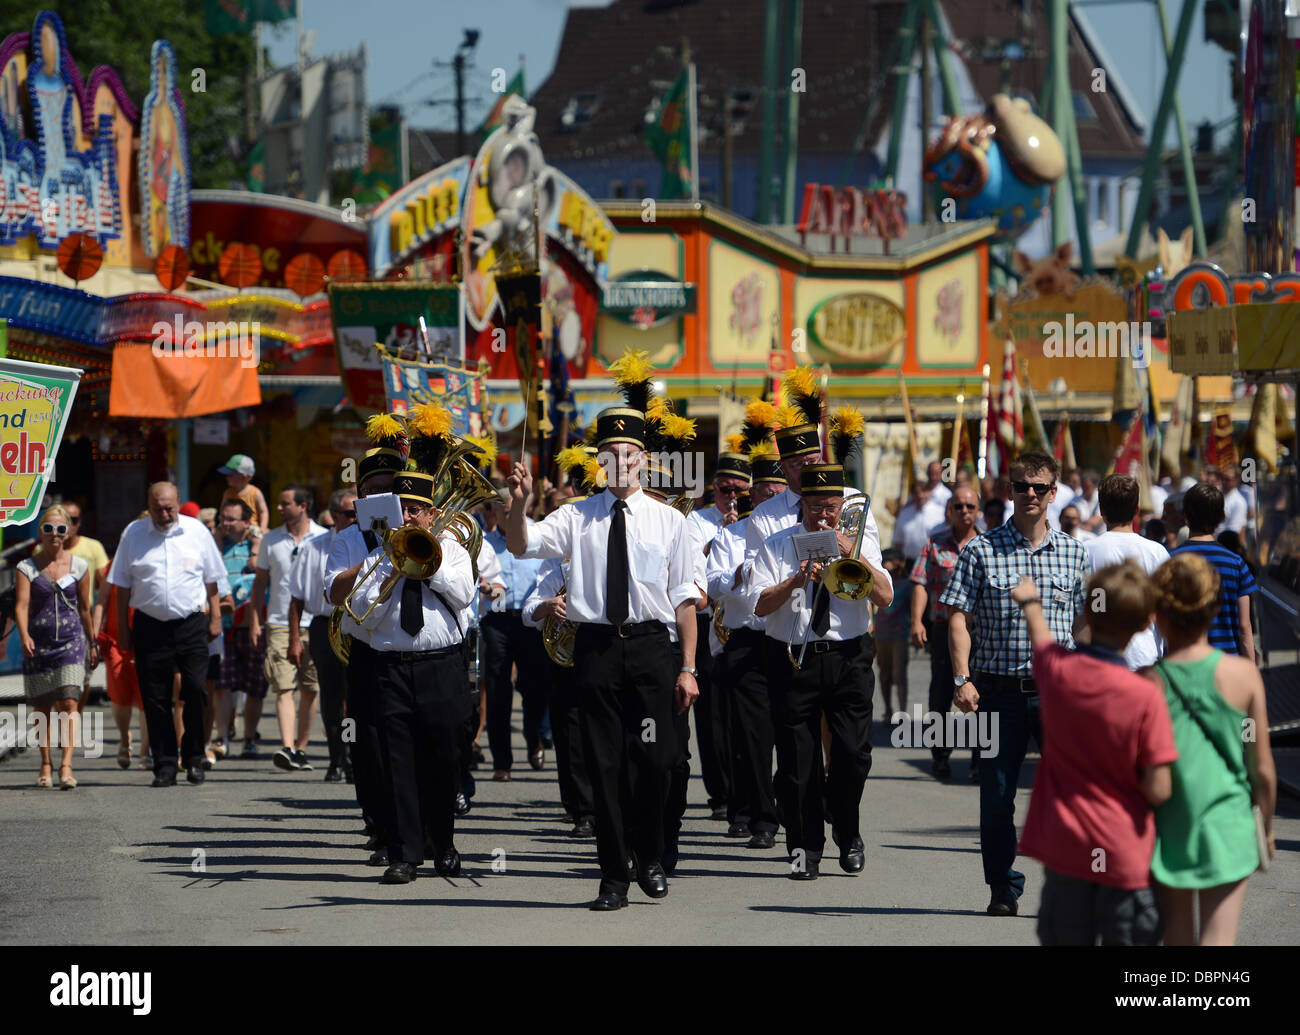 A coal mine band plays during the opening of the Cranger Fair in Herne, Germany, 02 August 2013. The largest folk festival in North Rhine-Westphalia takes place from 02 until 11 August. Photo: CAROLINE SEIDEL Stock Photo